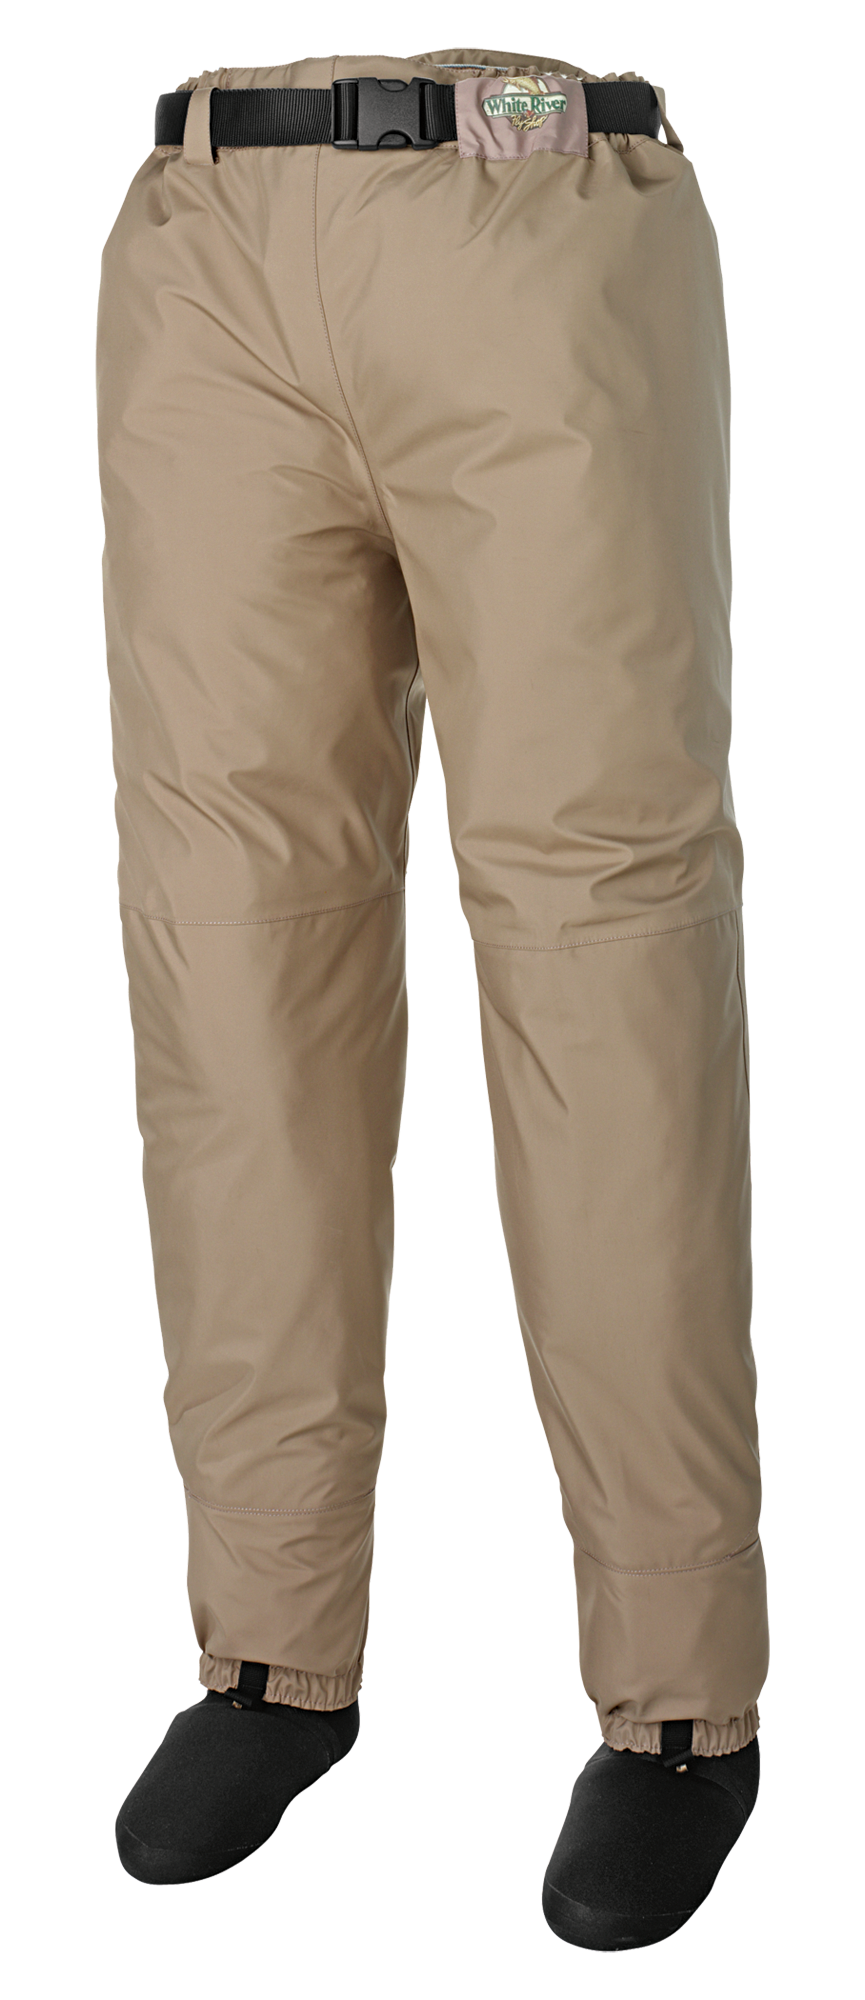 White River Fly Shop Classic Waist-High Stocking-Foot Breathable